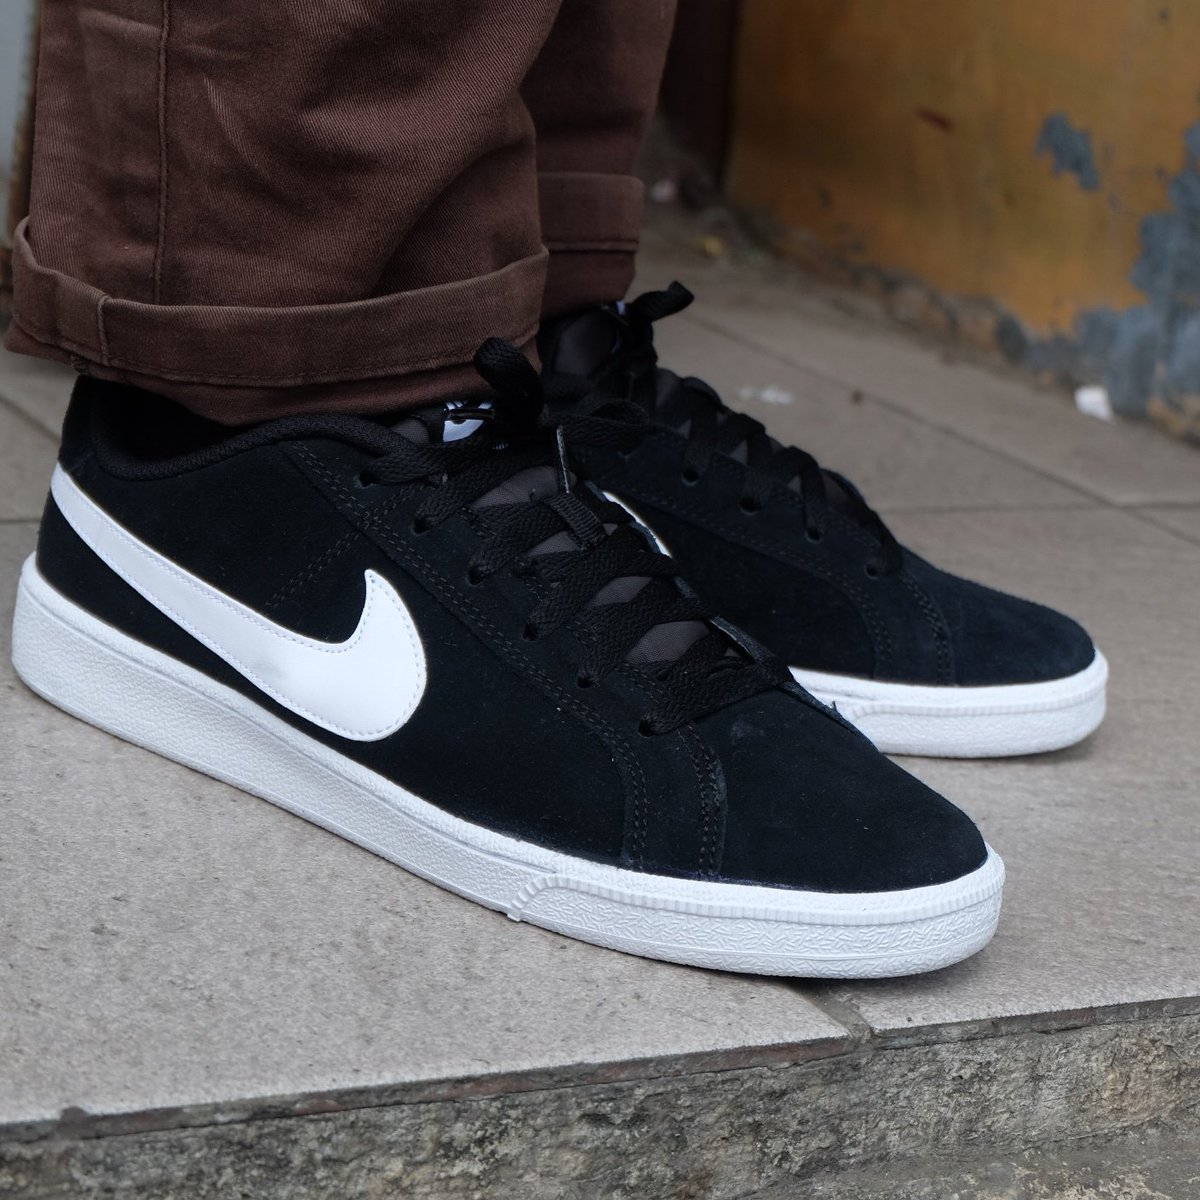 Pegashoes Bandung on Twitter: "NIKE COURT ROYALE (SUEDE BLACK ORIGINAL MADE IN INDONESIA BRAND NEW WITH REPLACE BOX https://t.co/nkVXs1dcMt" / Twitter